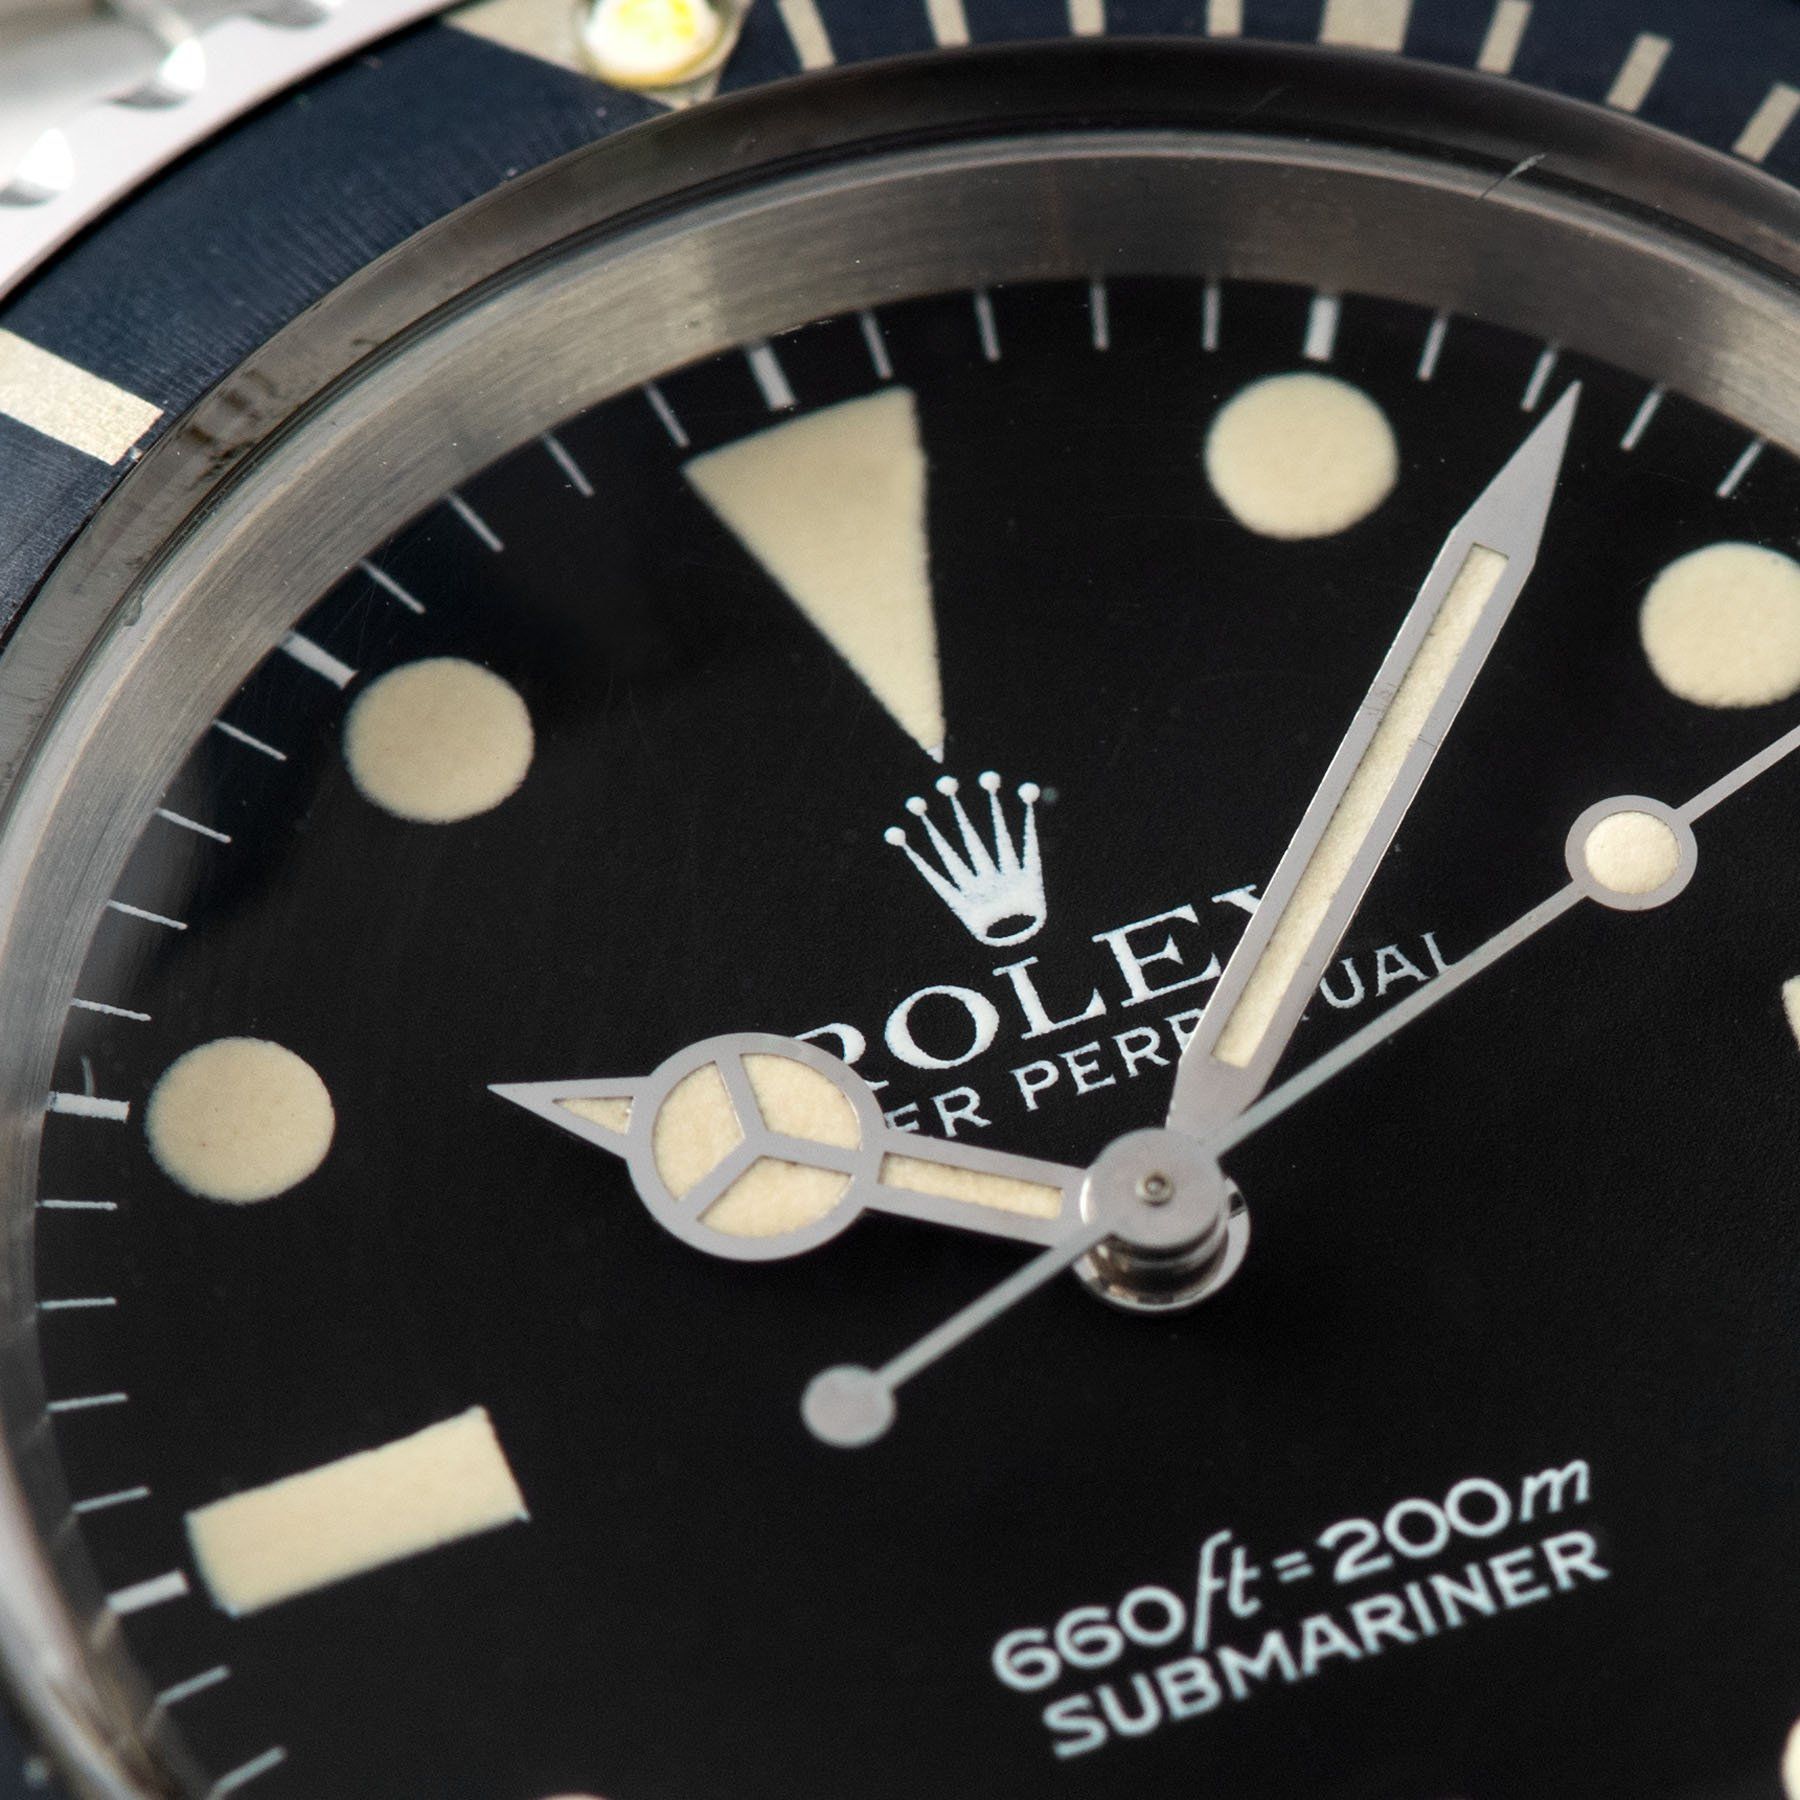 Rolex Submariner Mk 1 Maxi 5513 Box and Papers with oversized hour plots